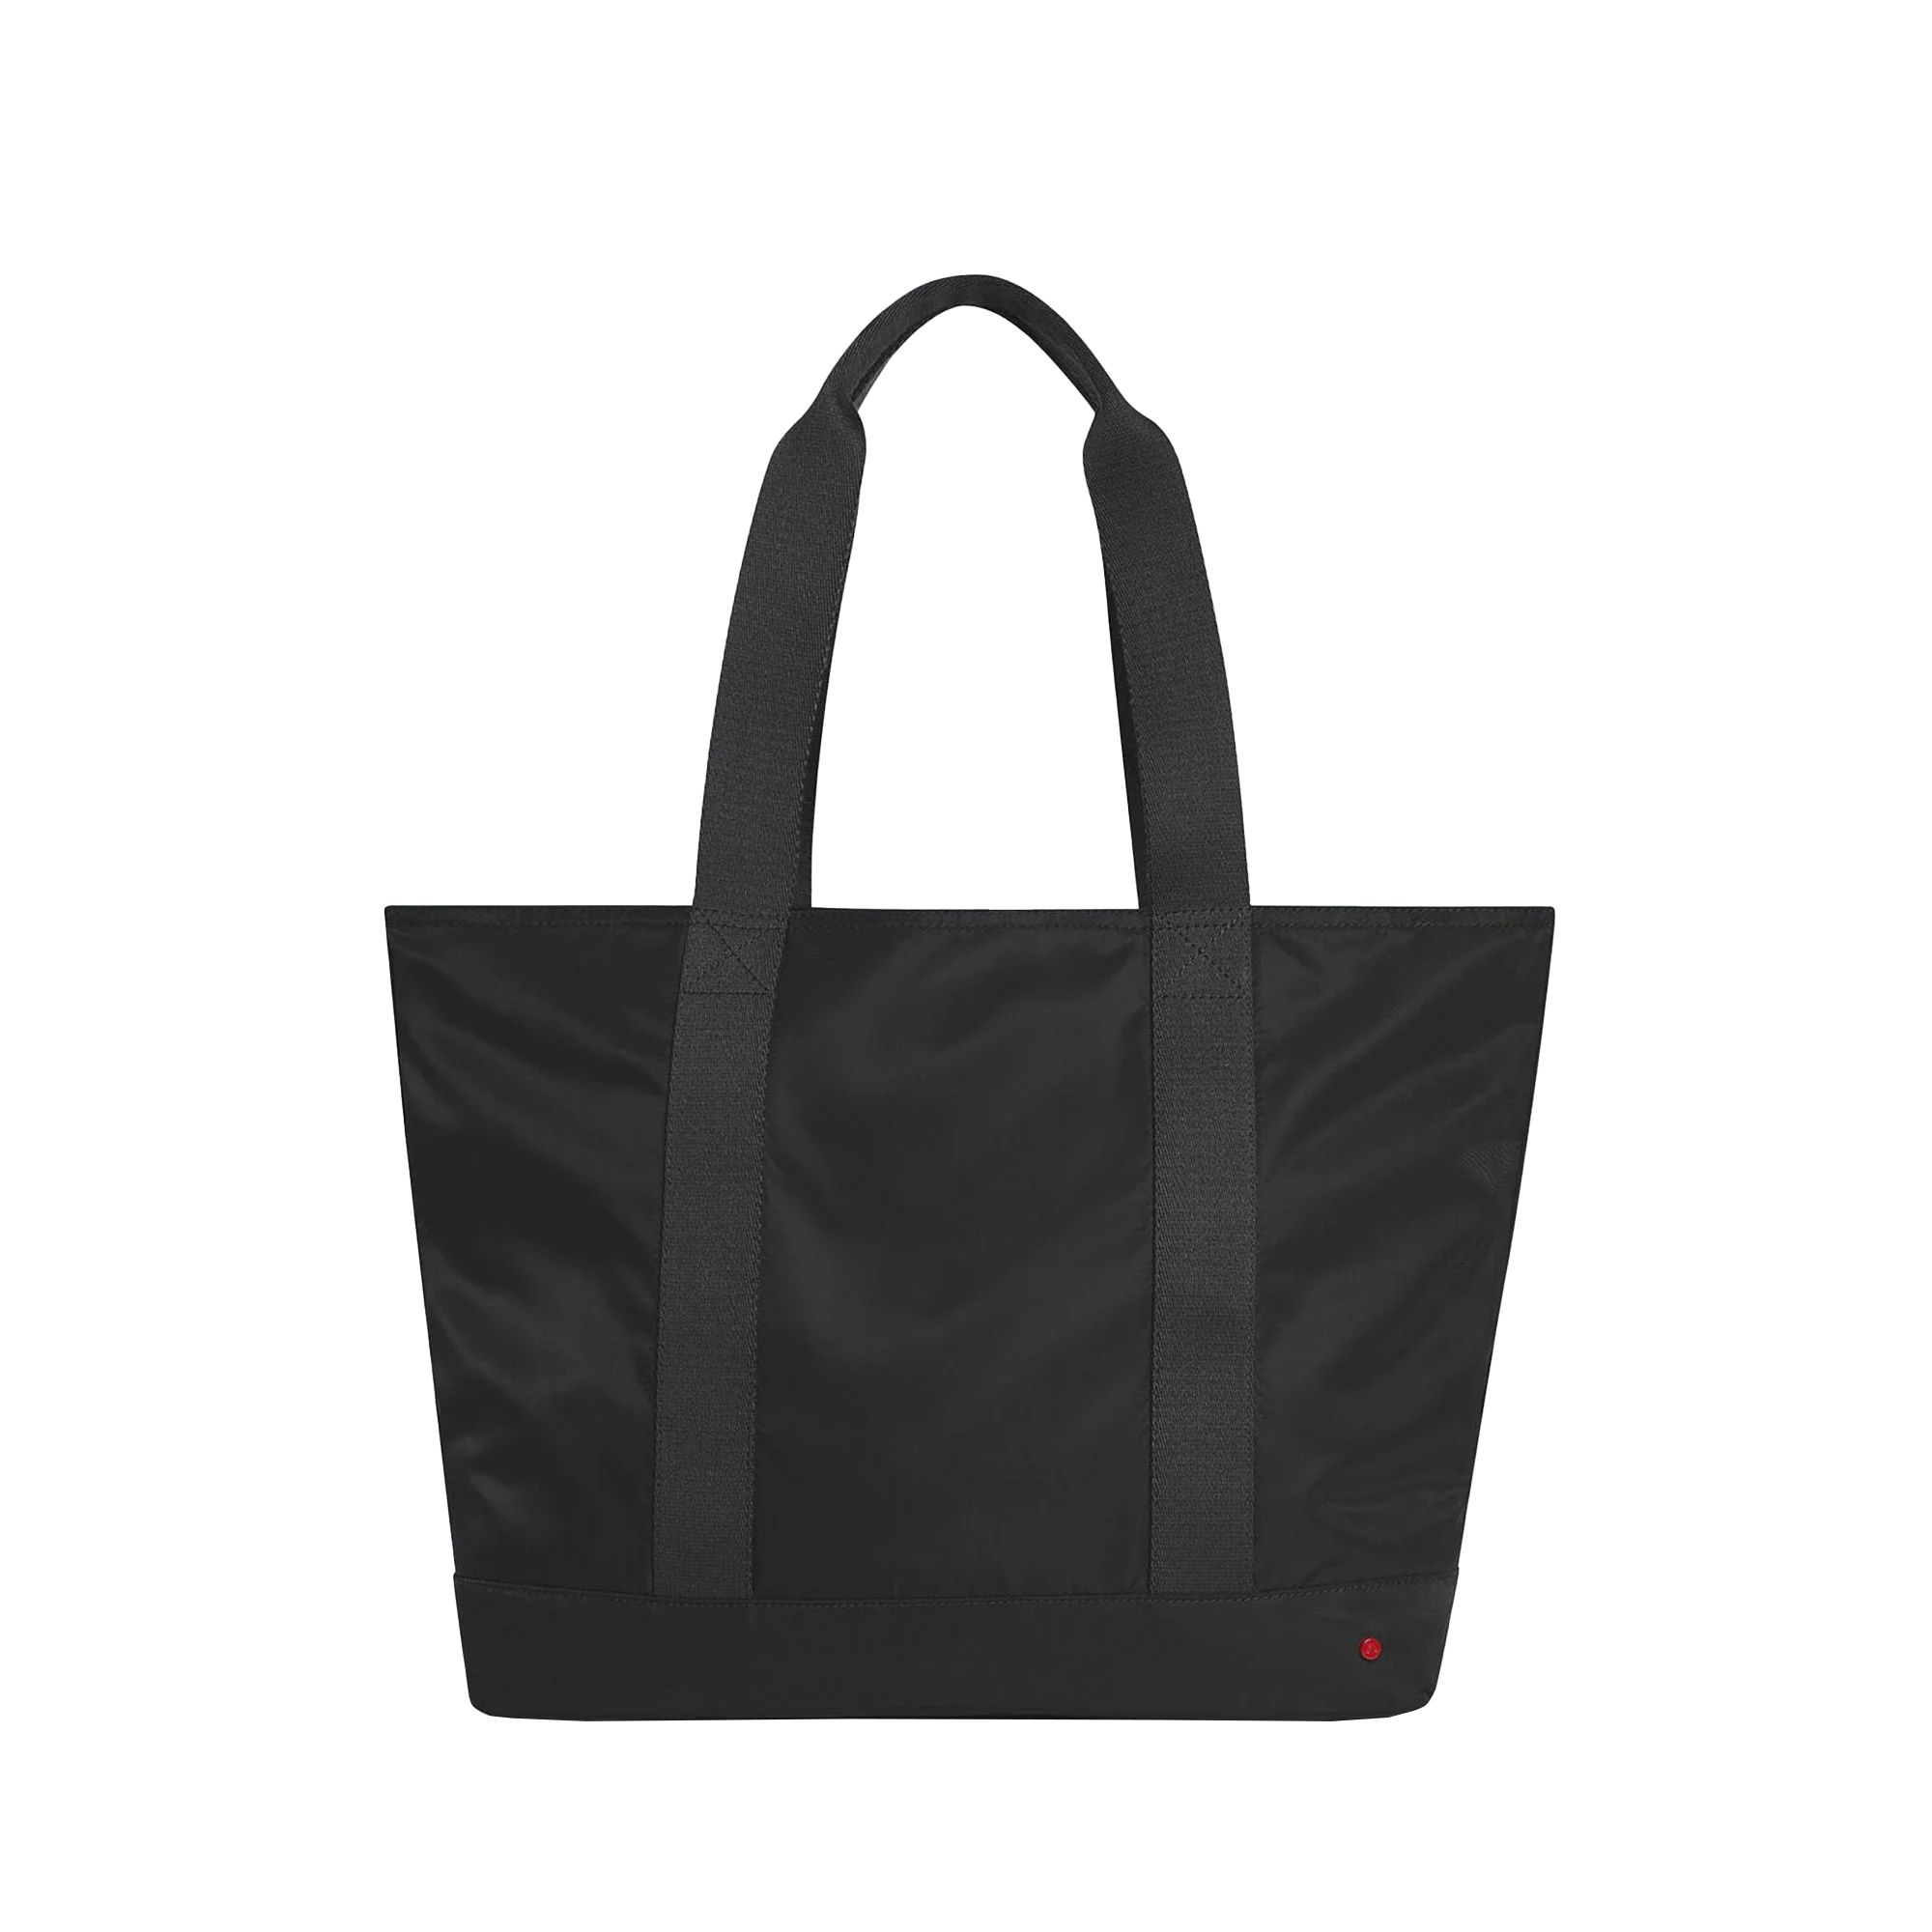 STATE Bags Nylon Tote - Graham in Black | STATE Bags